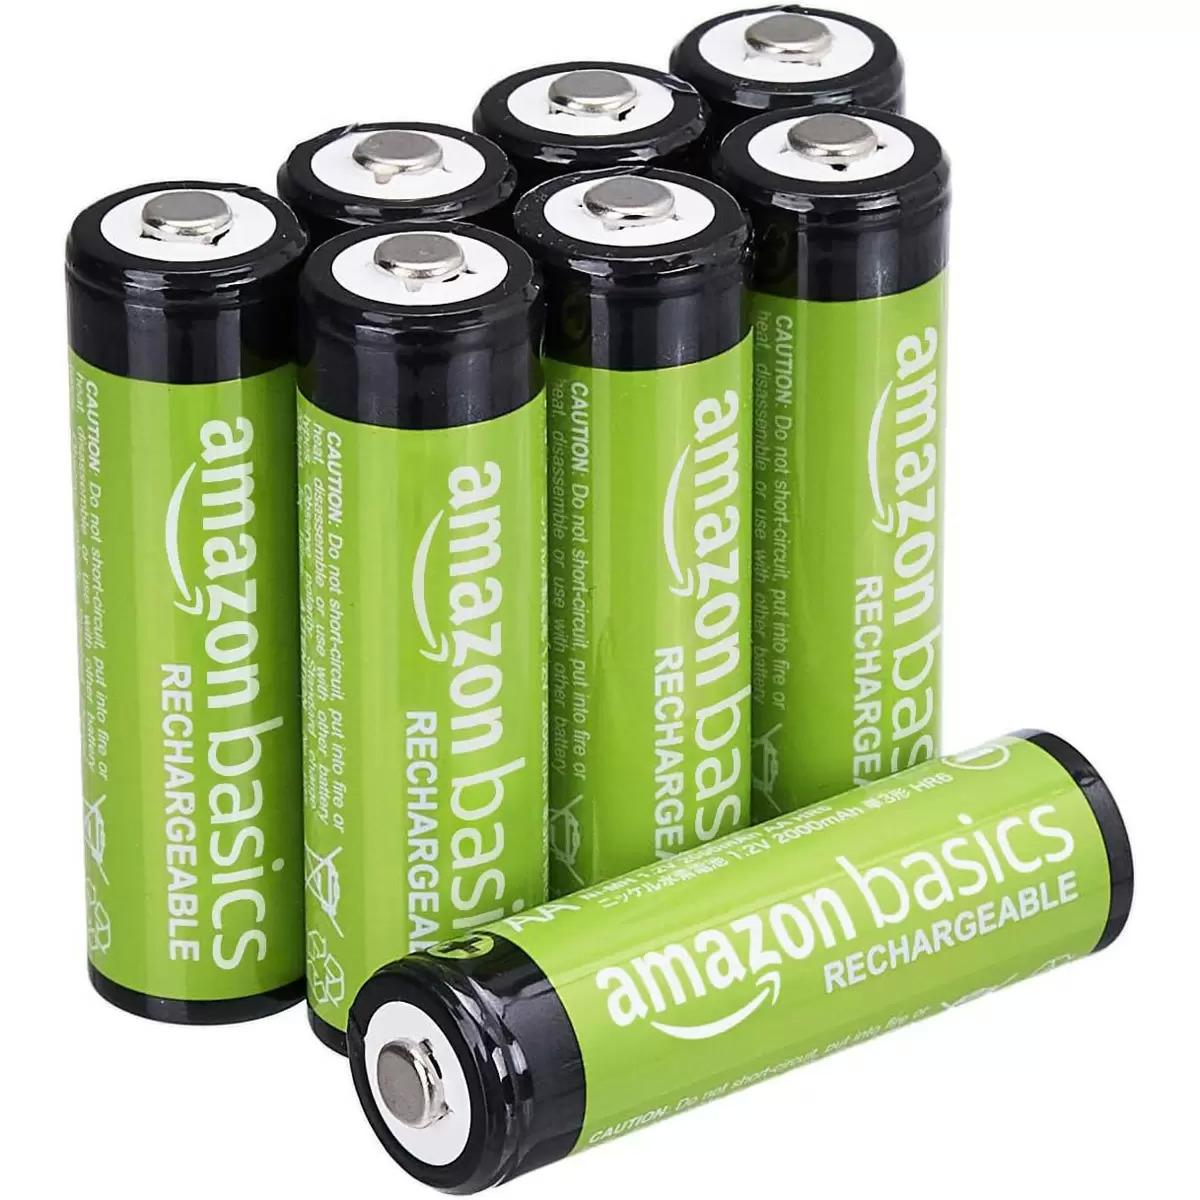 Amazon Basics 2000mAh AA Rechargeable Batteries 8 Pack for $6.67 Shipped